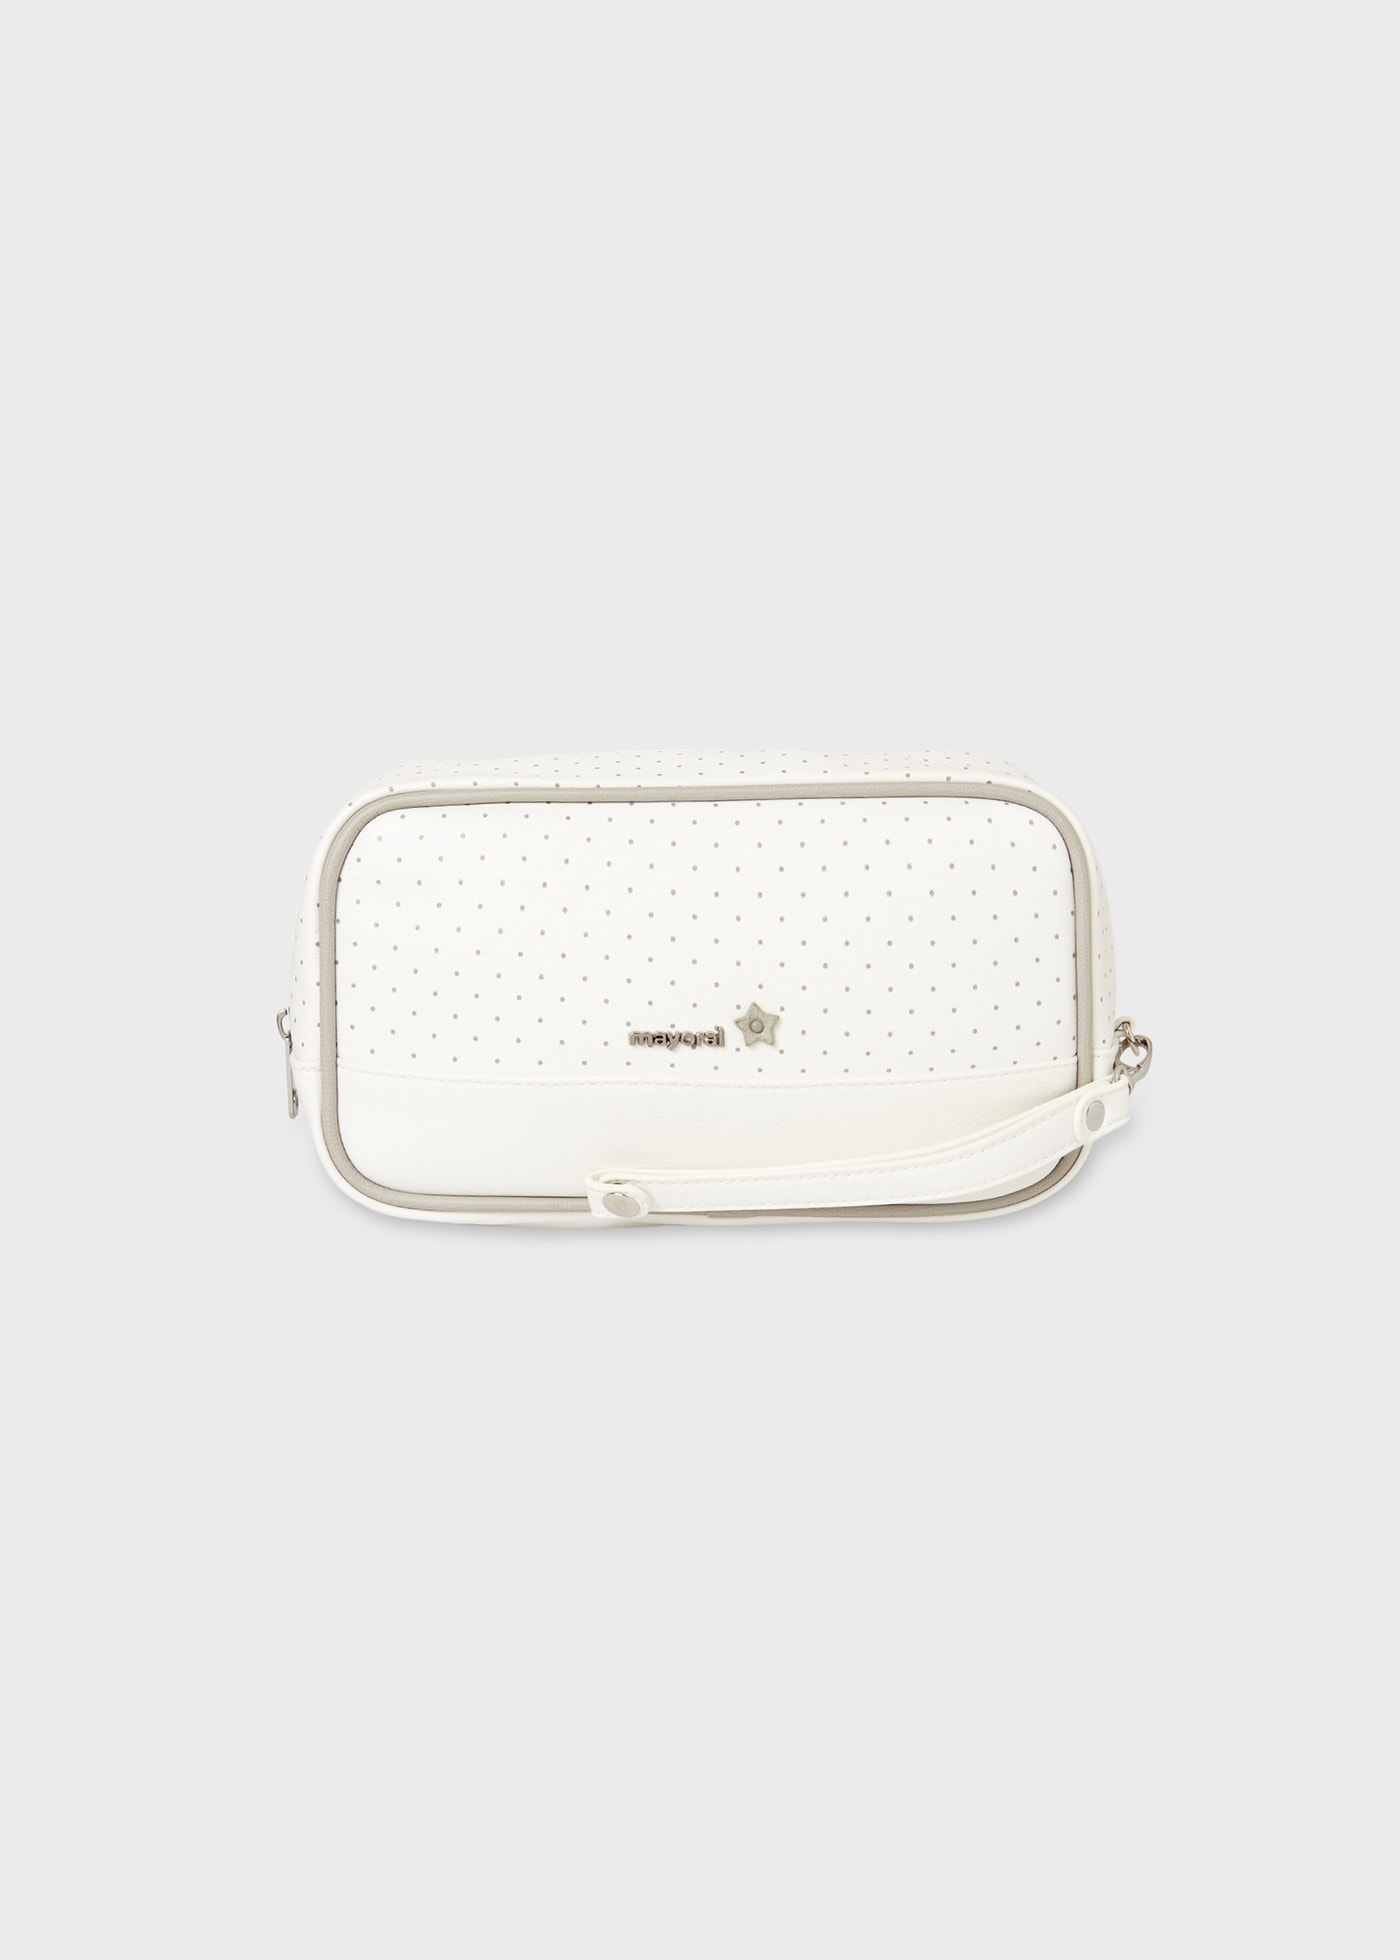 White Color Toiletry Bags, Cosmetic Bag White Color